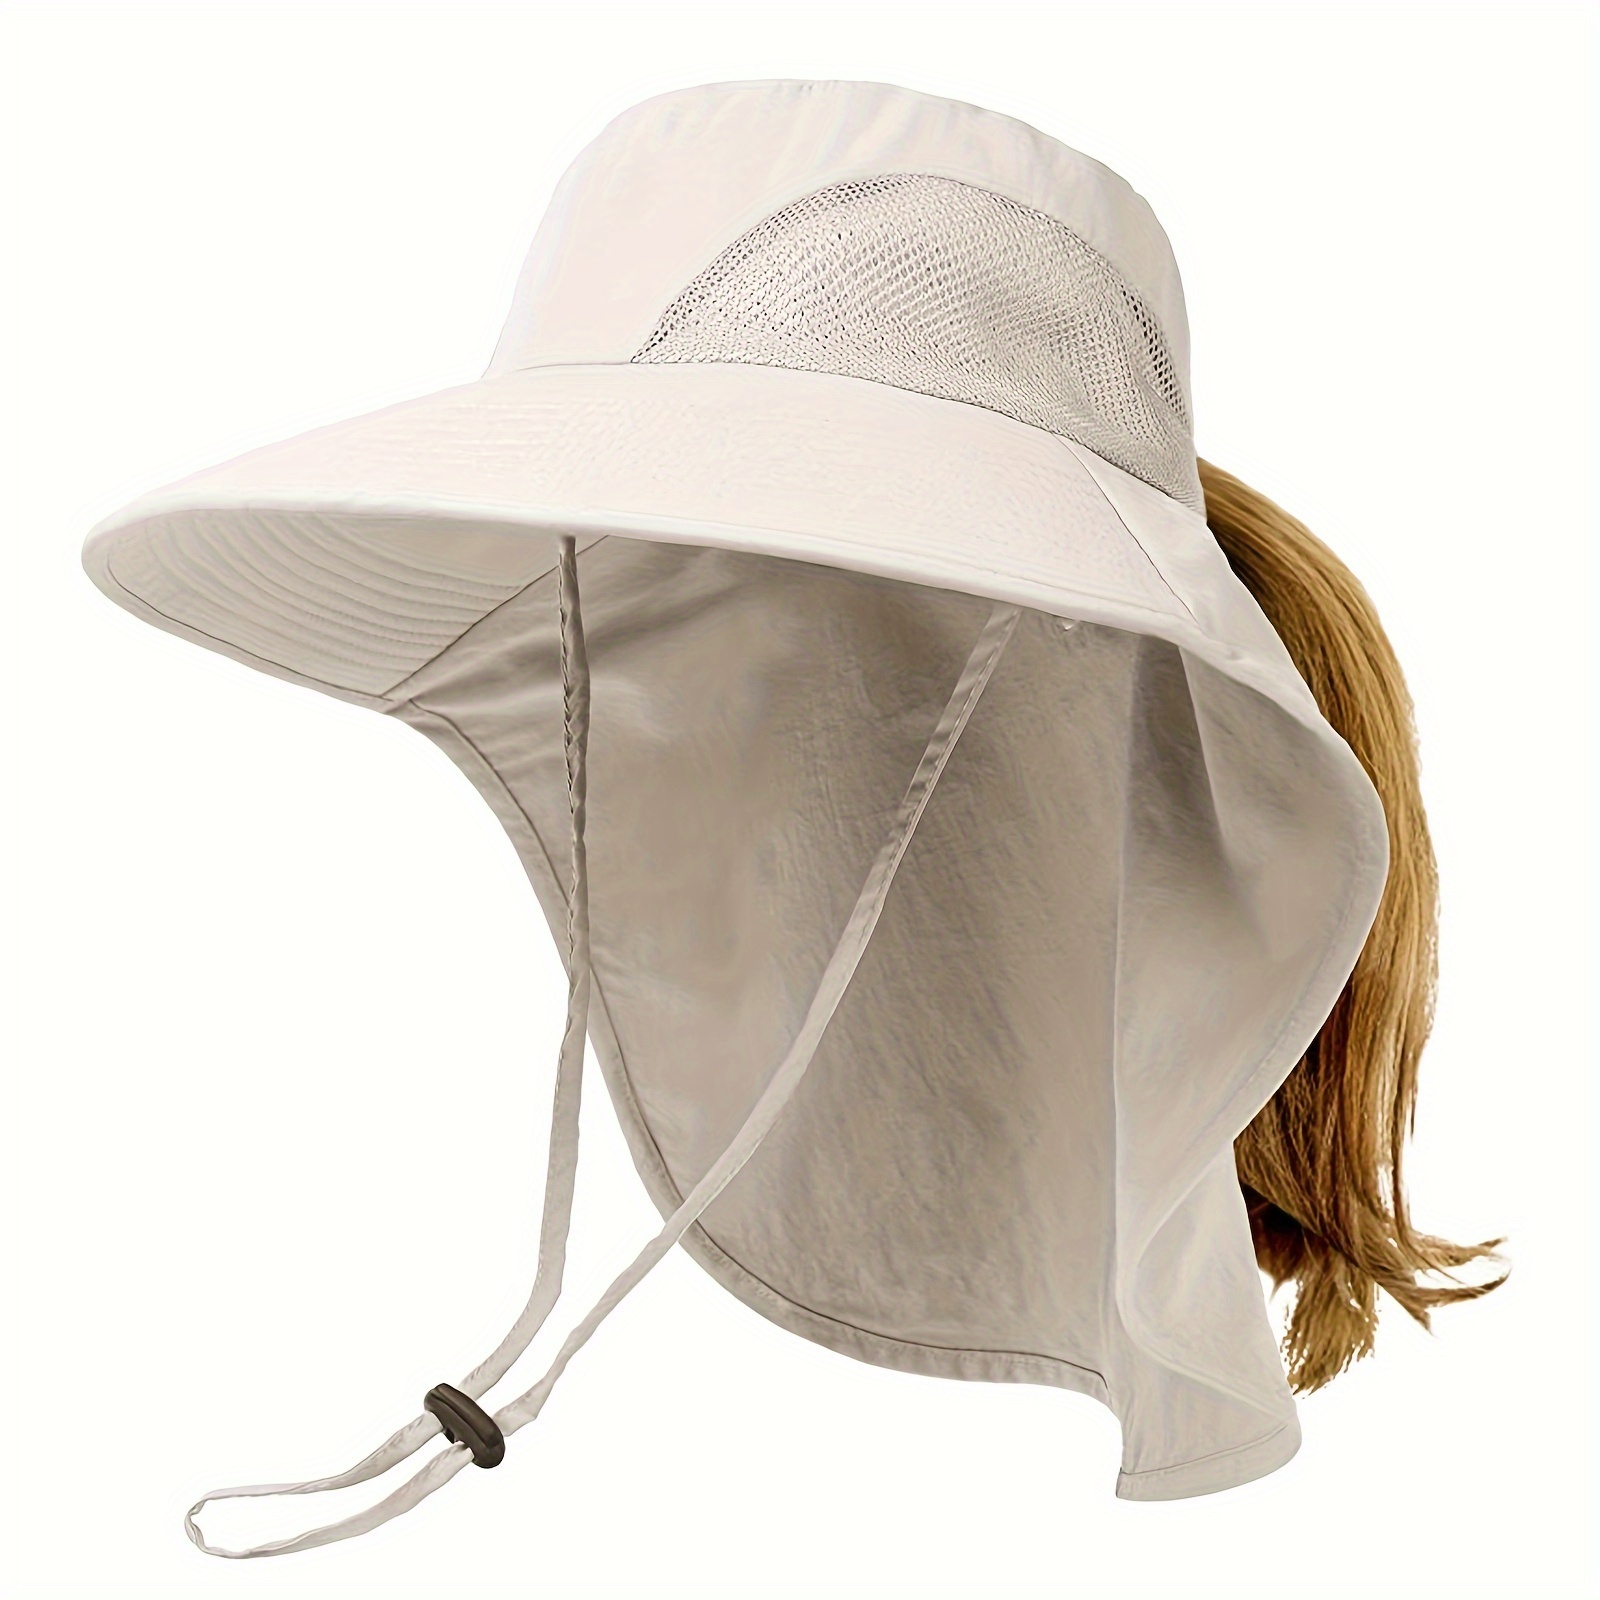 Waterproof Nylon UPF 50+ Sun Hat, Bucket Hats Mesh Breathable Hiking Fishing Bucket Hat with Large Neck Flap unisex UV Protection Boonie Hat for